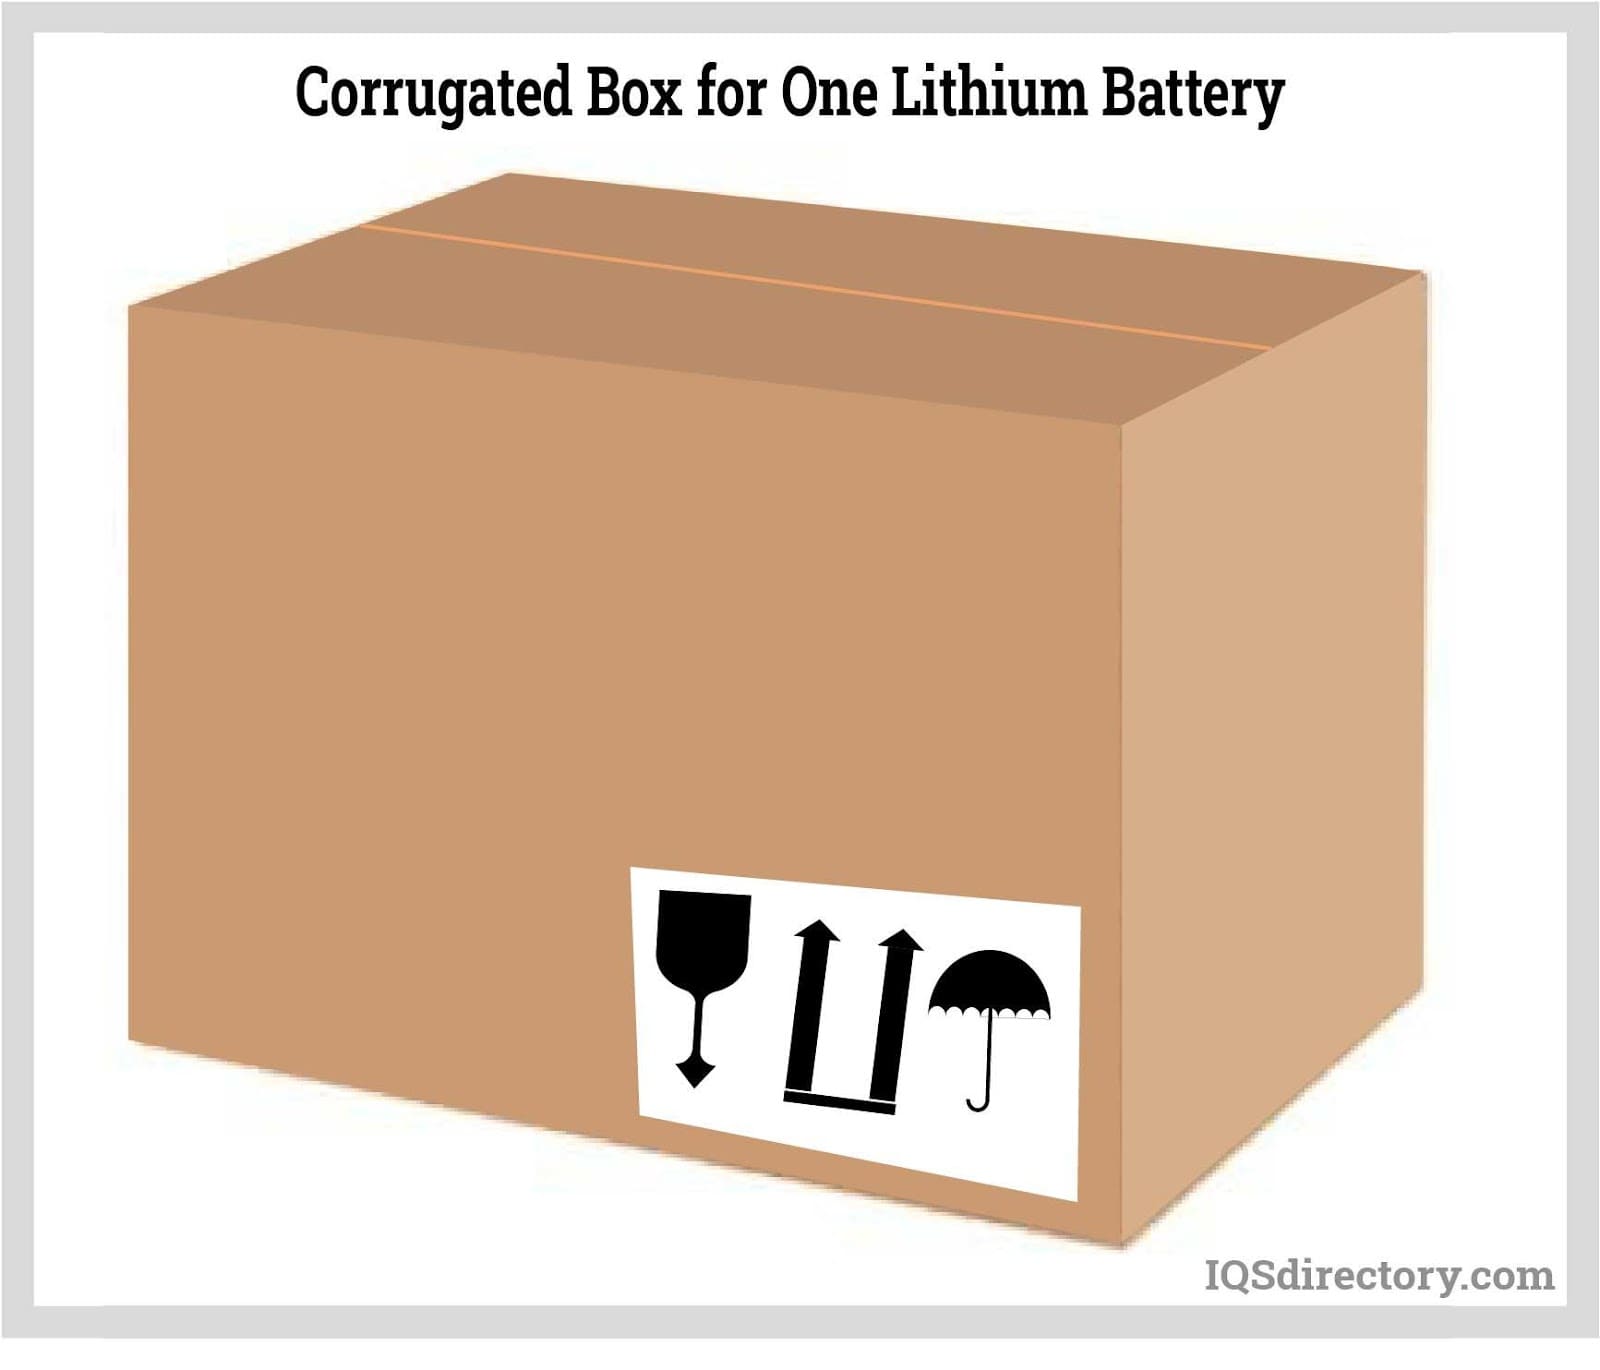 Corrugated Box for One Lithium Battery